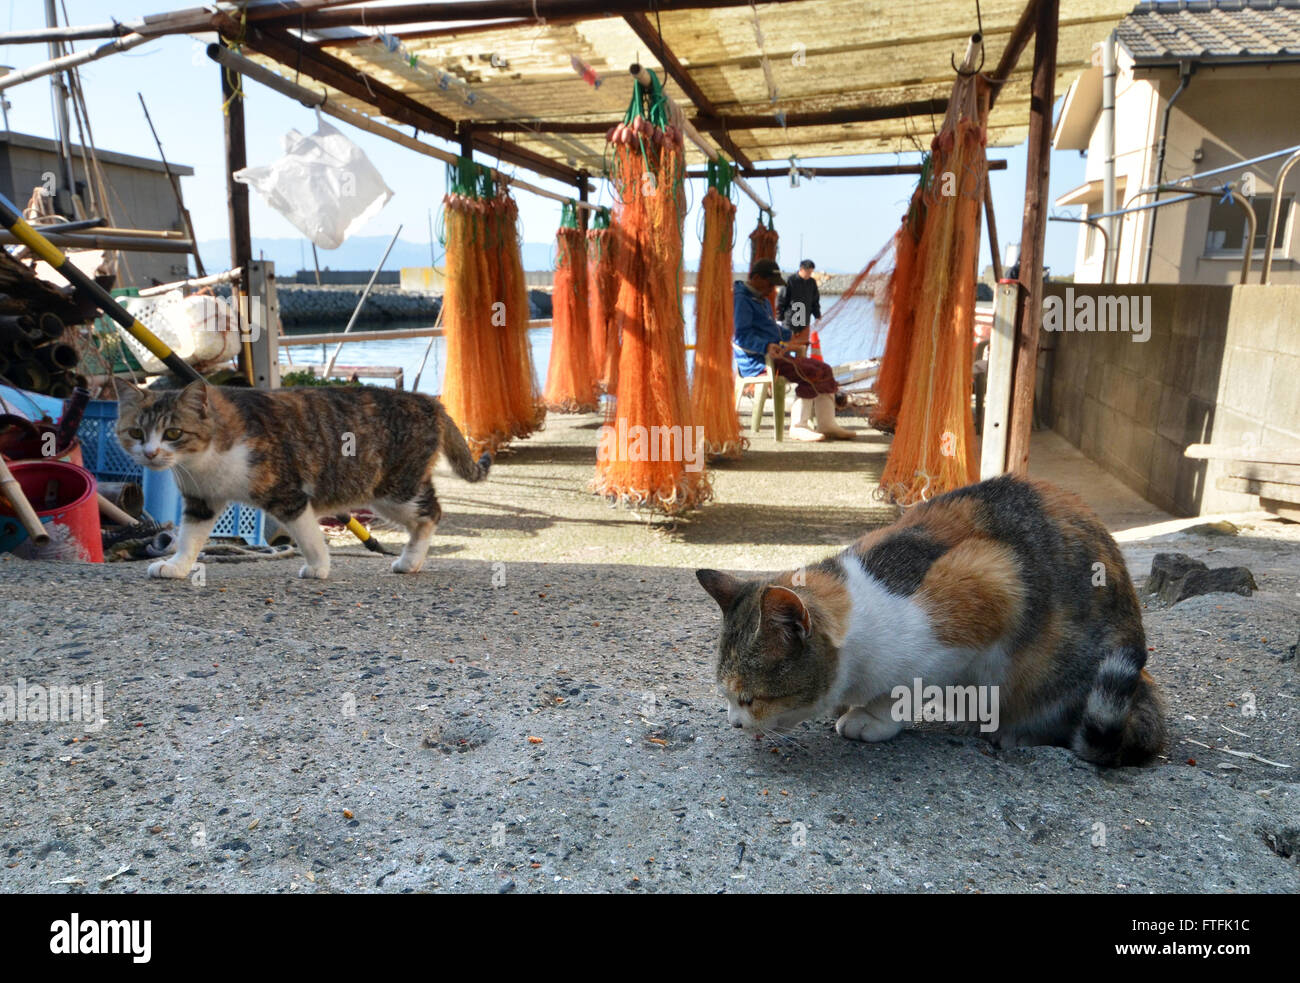 Tuesday. 22nd Mar, 2016. An army of cats inhabit the cat paradise of Aoshima island, off the coast of Ozu city in Ehime prefecture on Tuesday, March 22, 2016. More than 100 cats live on the tiny island which has only 16 elderly residents. The cats were originally brought to the island to kill the mice infesting local fishermen's boats. © Yoshio Tsunoda/AFLO/Alamy Live News Stock Photo